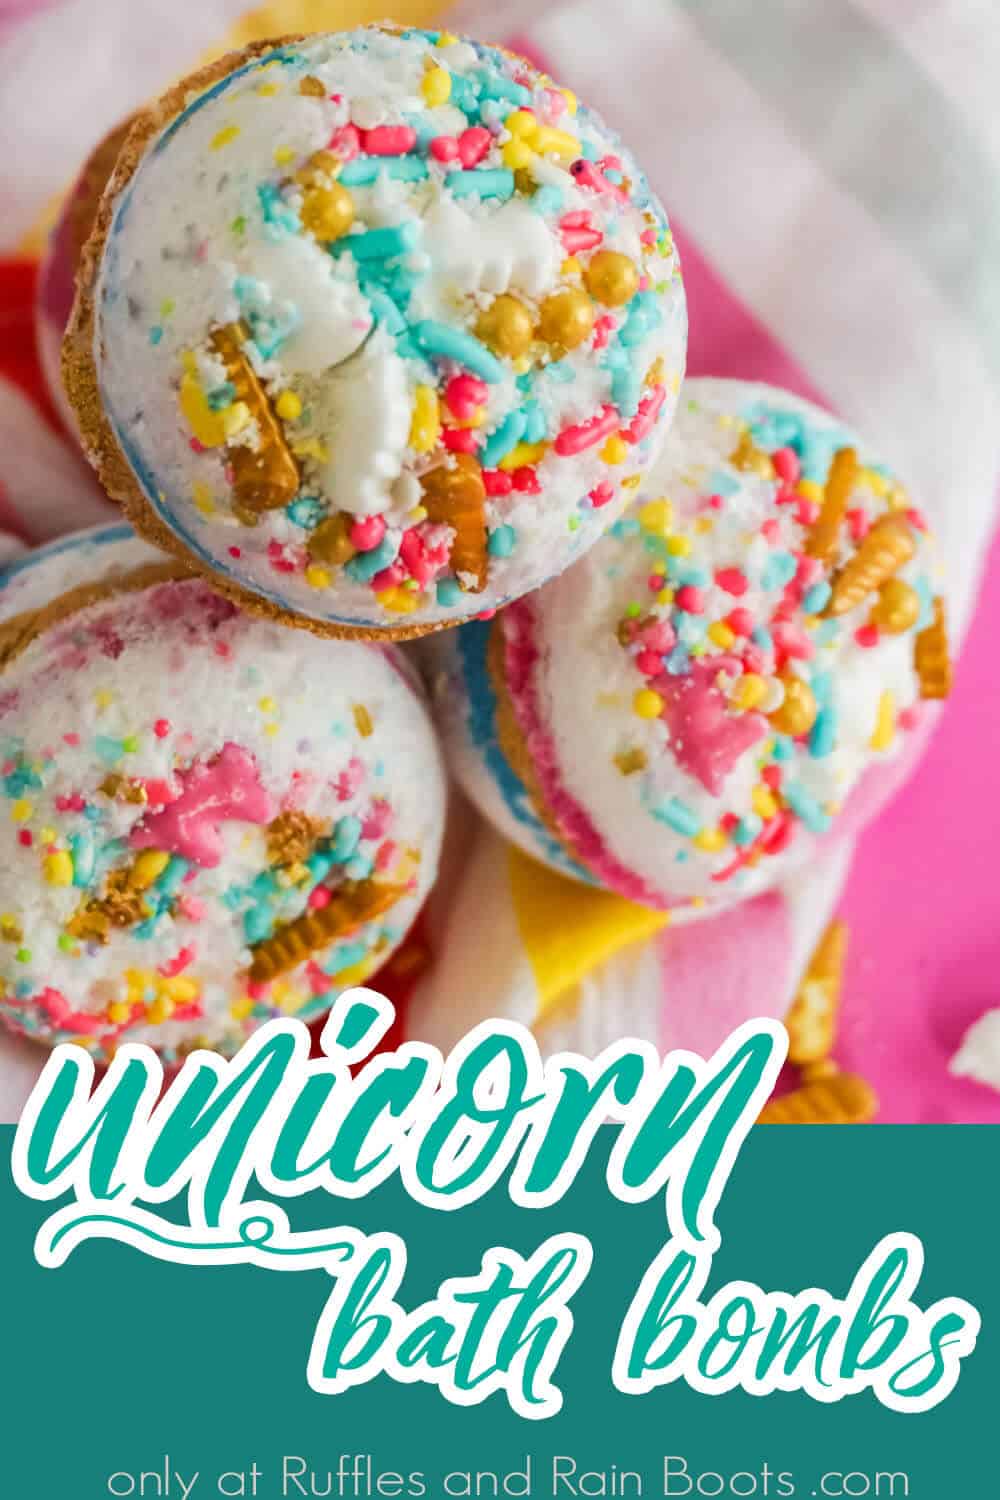 closeup of easy diy bath bombs with sprinkles with text which reads unicorn bath bombs